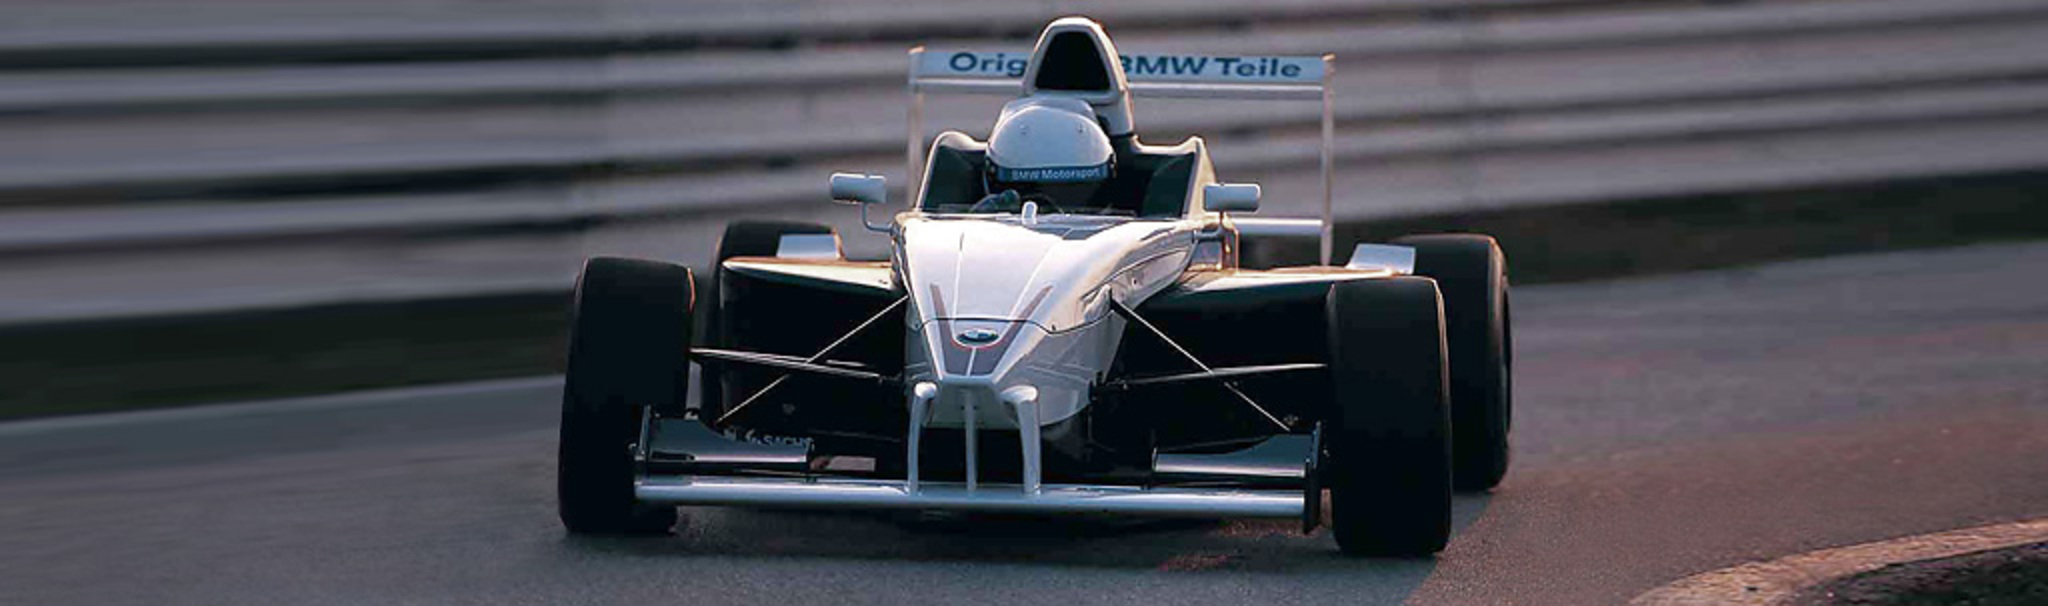 The Formula BMW FB02 is the vehicle used in the Formula BMW Racing